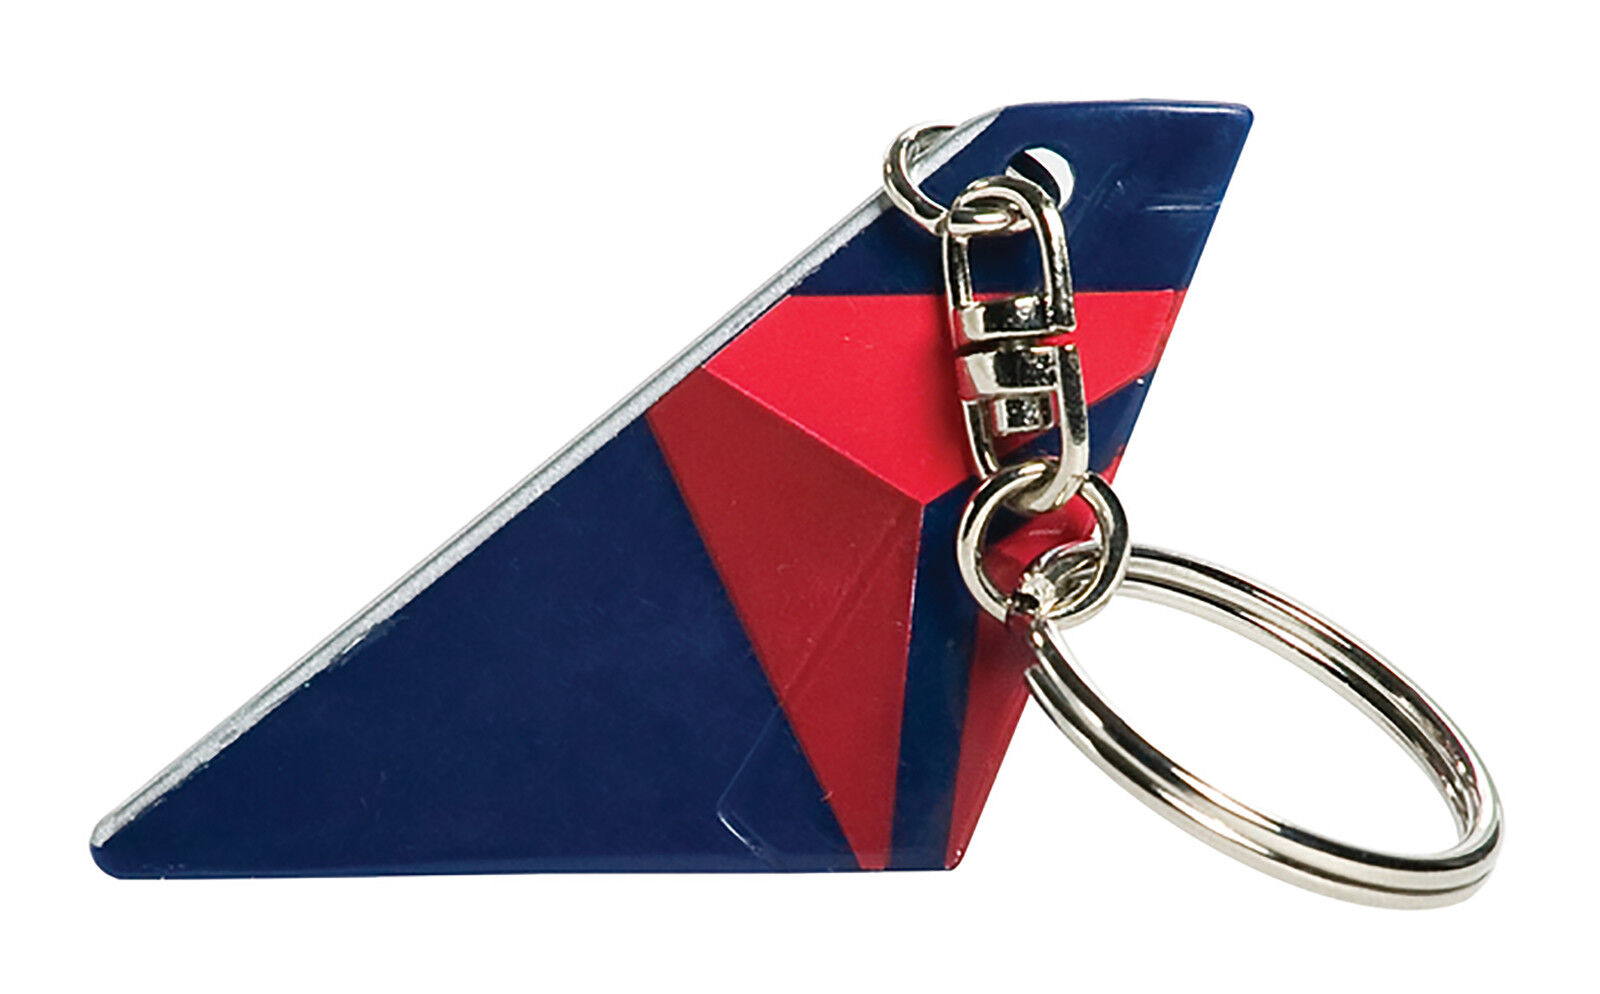 DARON DELTA AIRLINES TAIL KEYCHAIN TK2606 NEW.